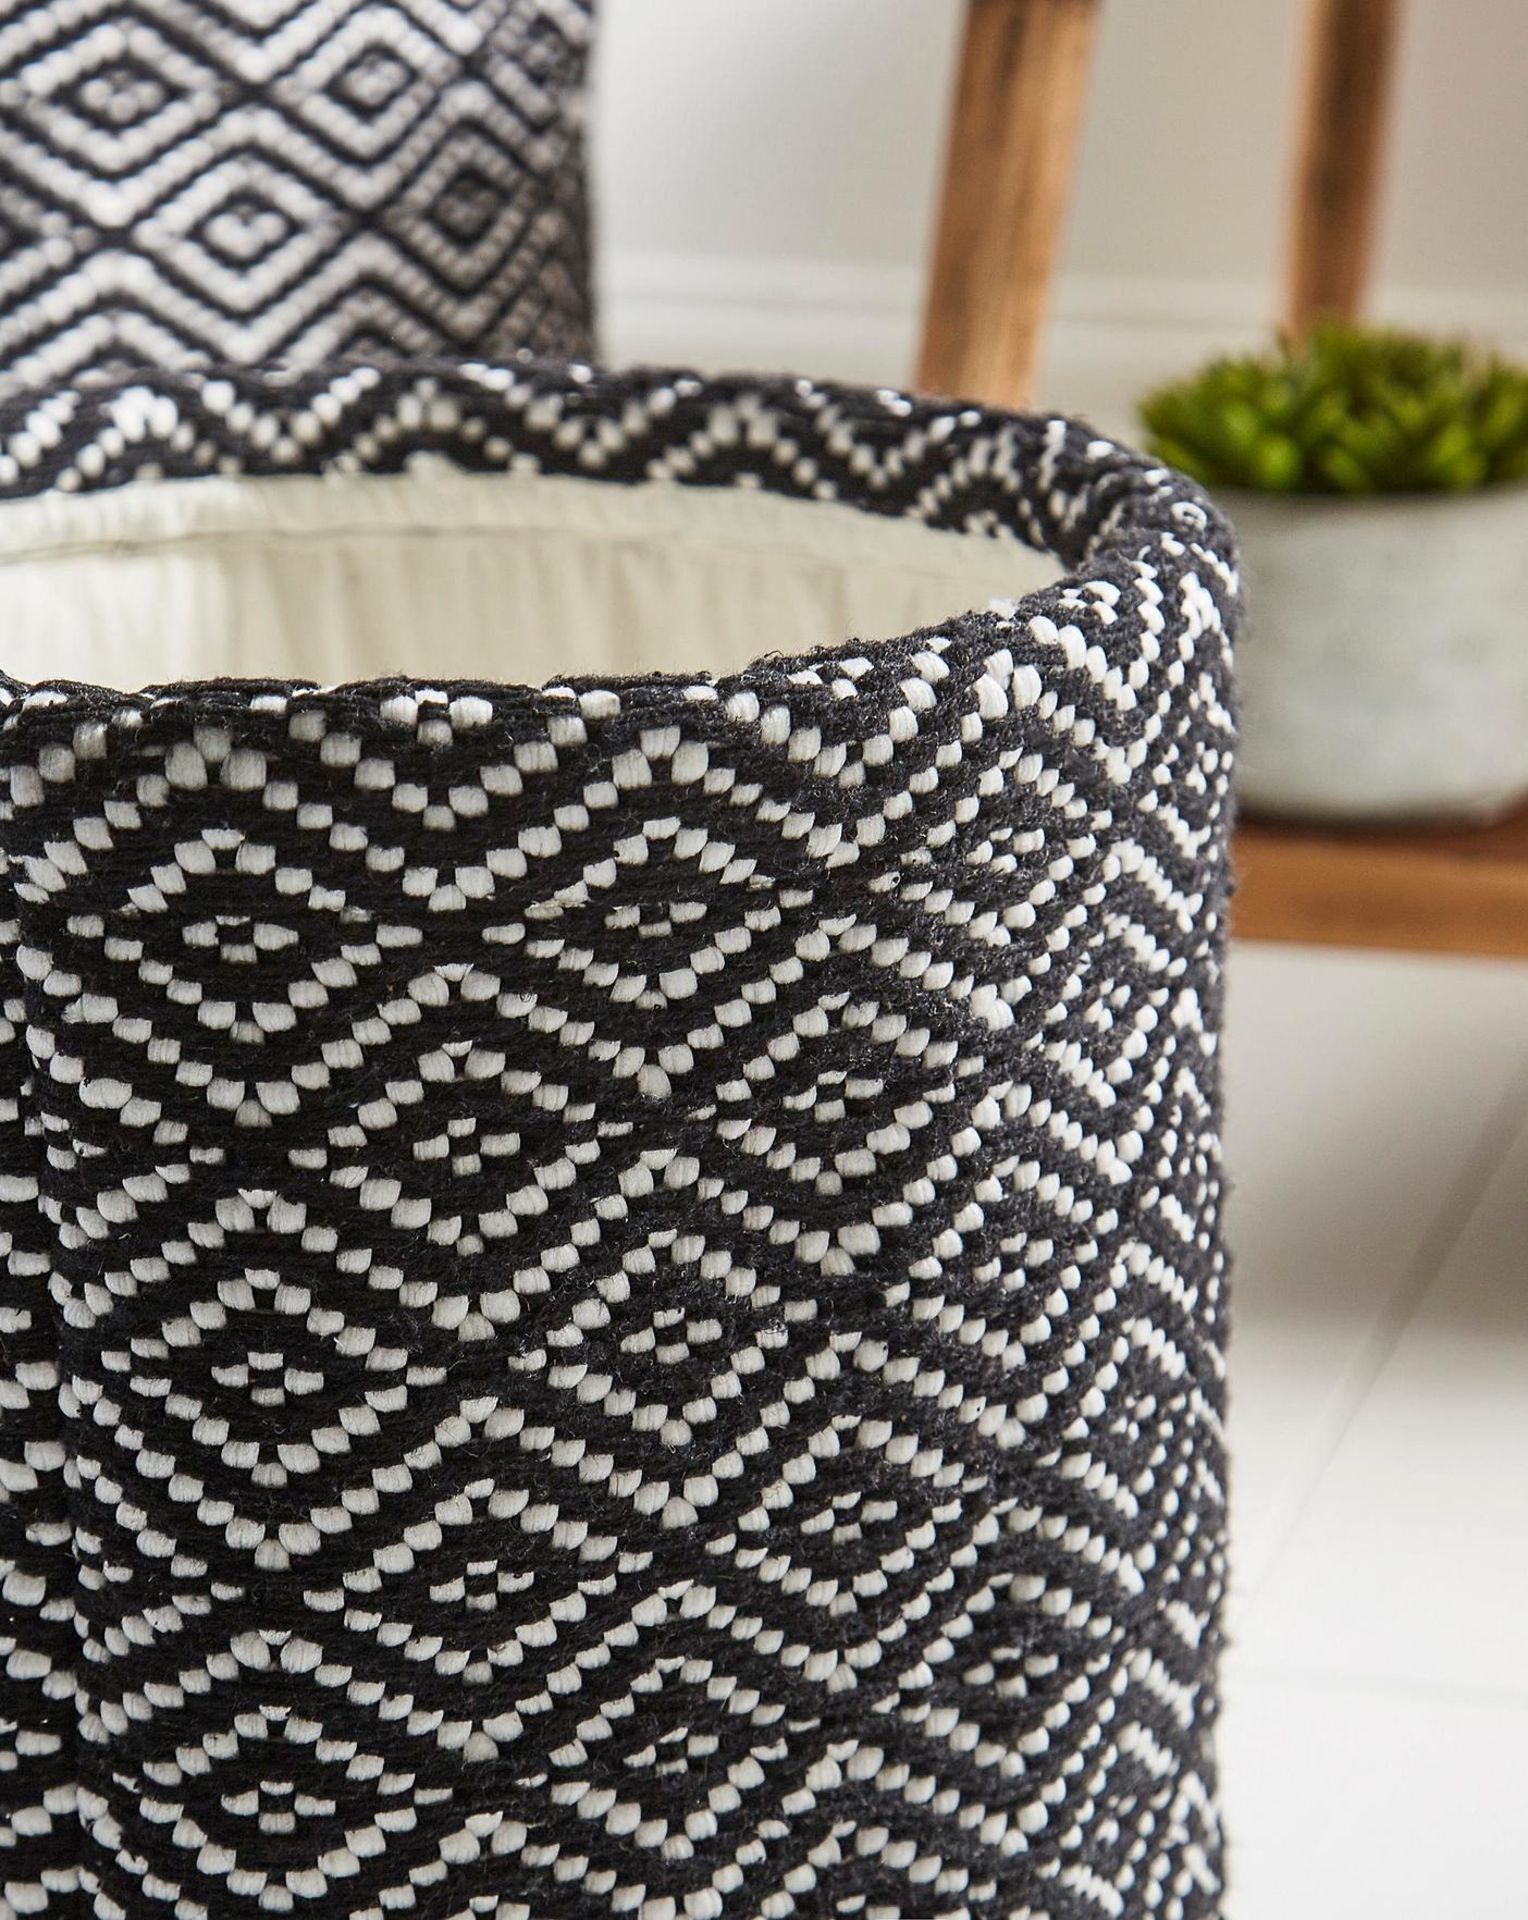 3x BRAND NEW Set of 2 Monochrome Woven Baskets. RRP £40 EACH. These lovely monochrome woven - Image 2 of 3